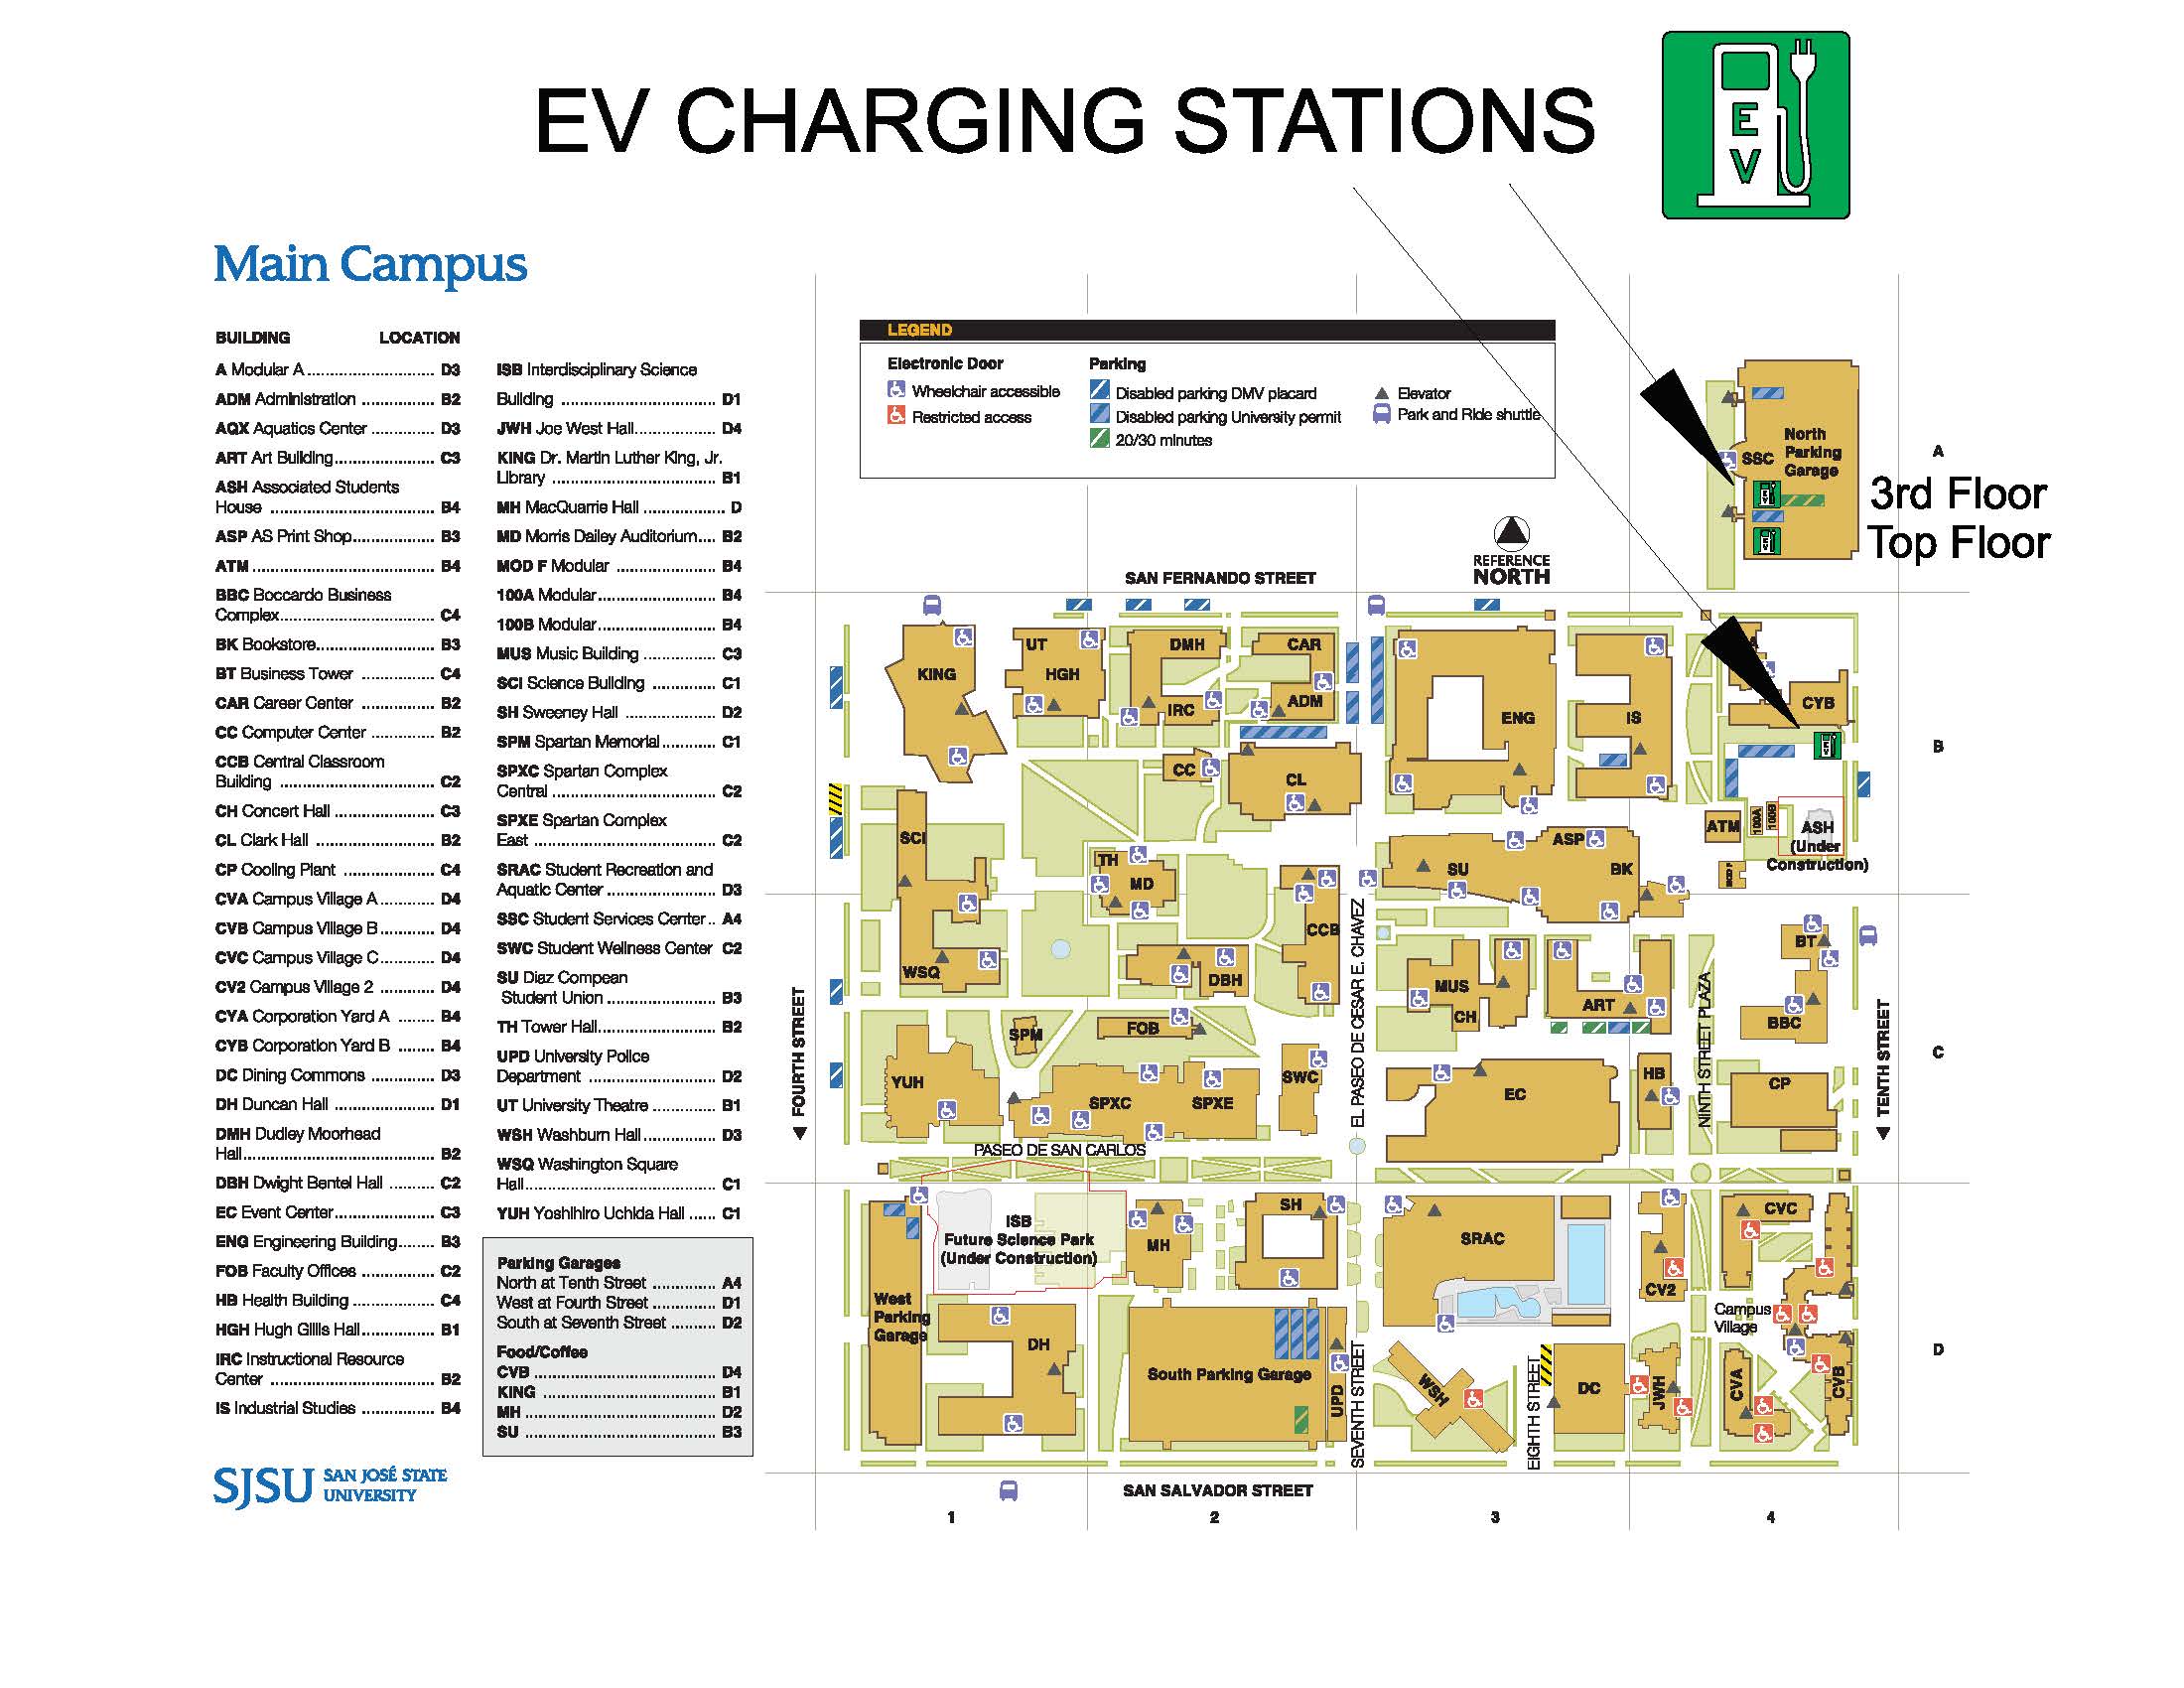 Electric Vehicle Charging stations map